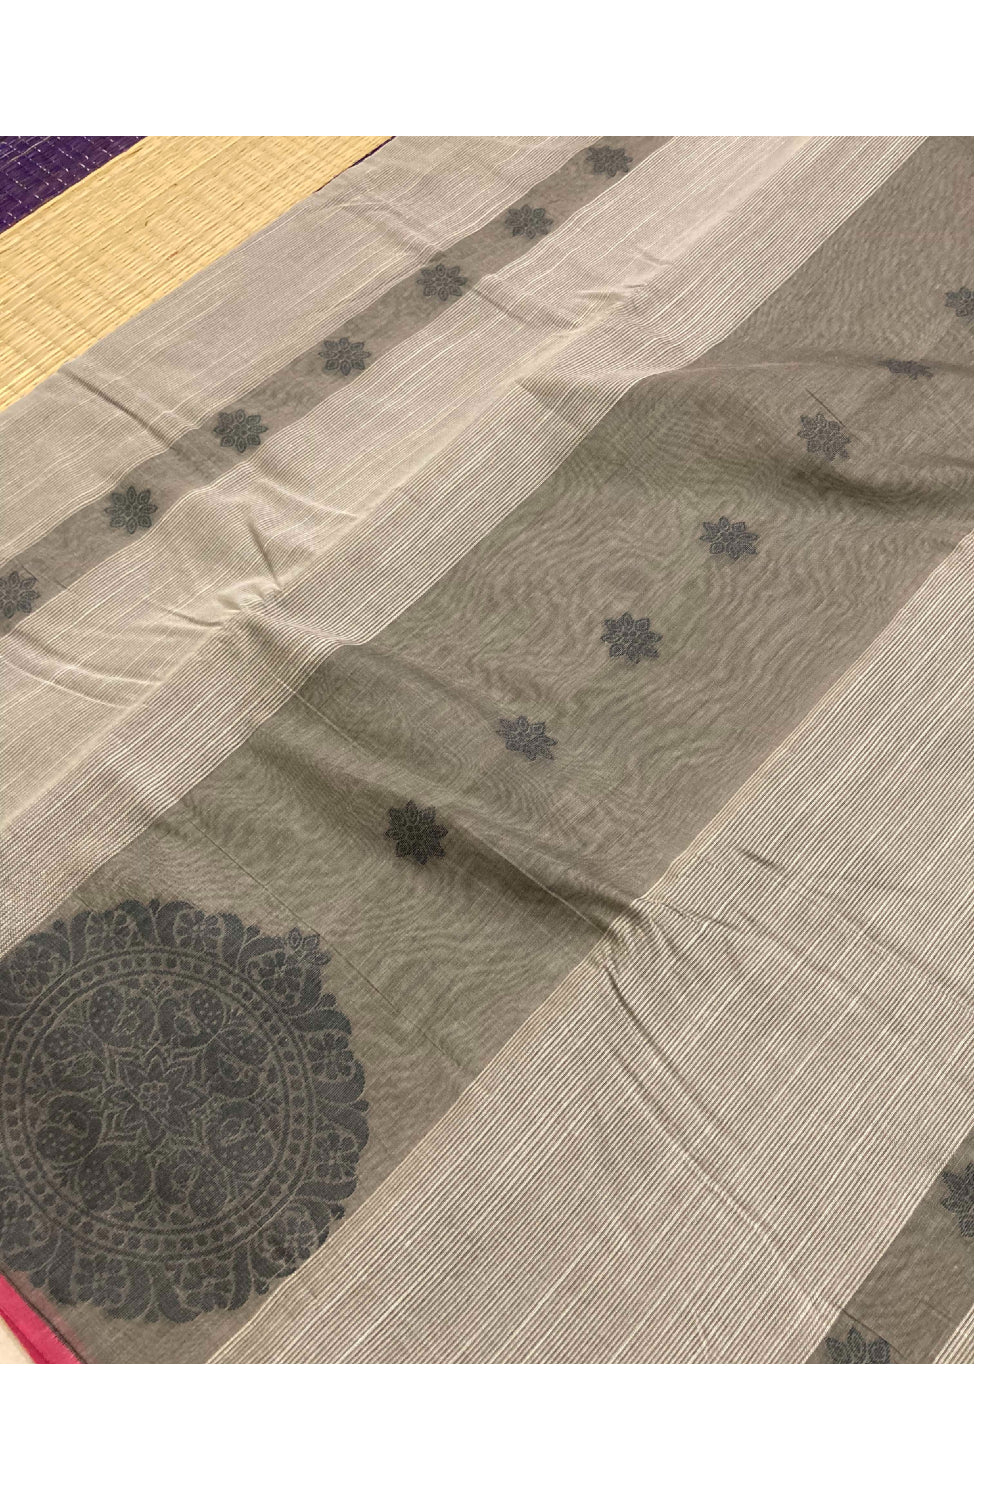 Southloom Sico Gadwal Semi Silk Saree in Grey with Floral Motifs (Blouse Piece with Work)